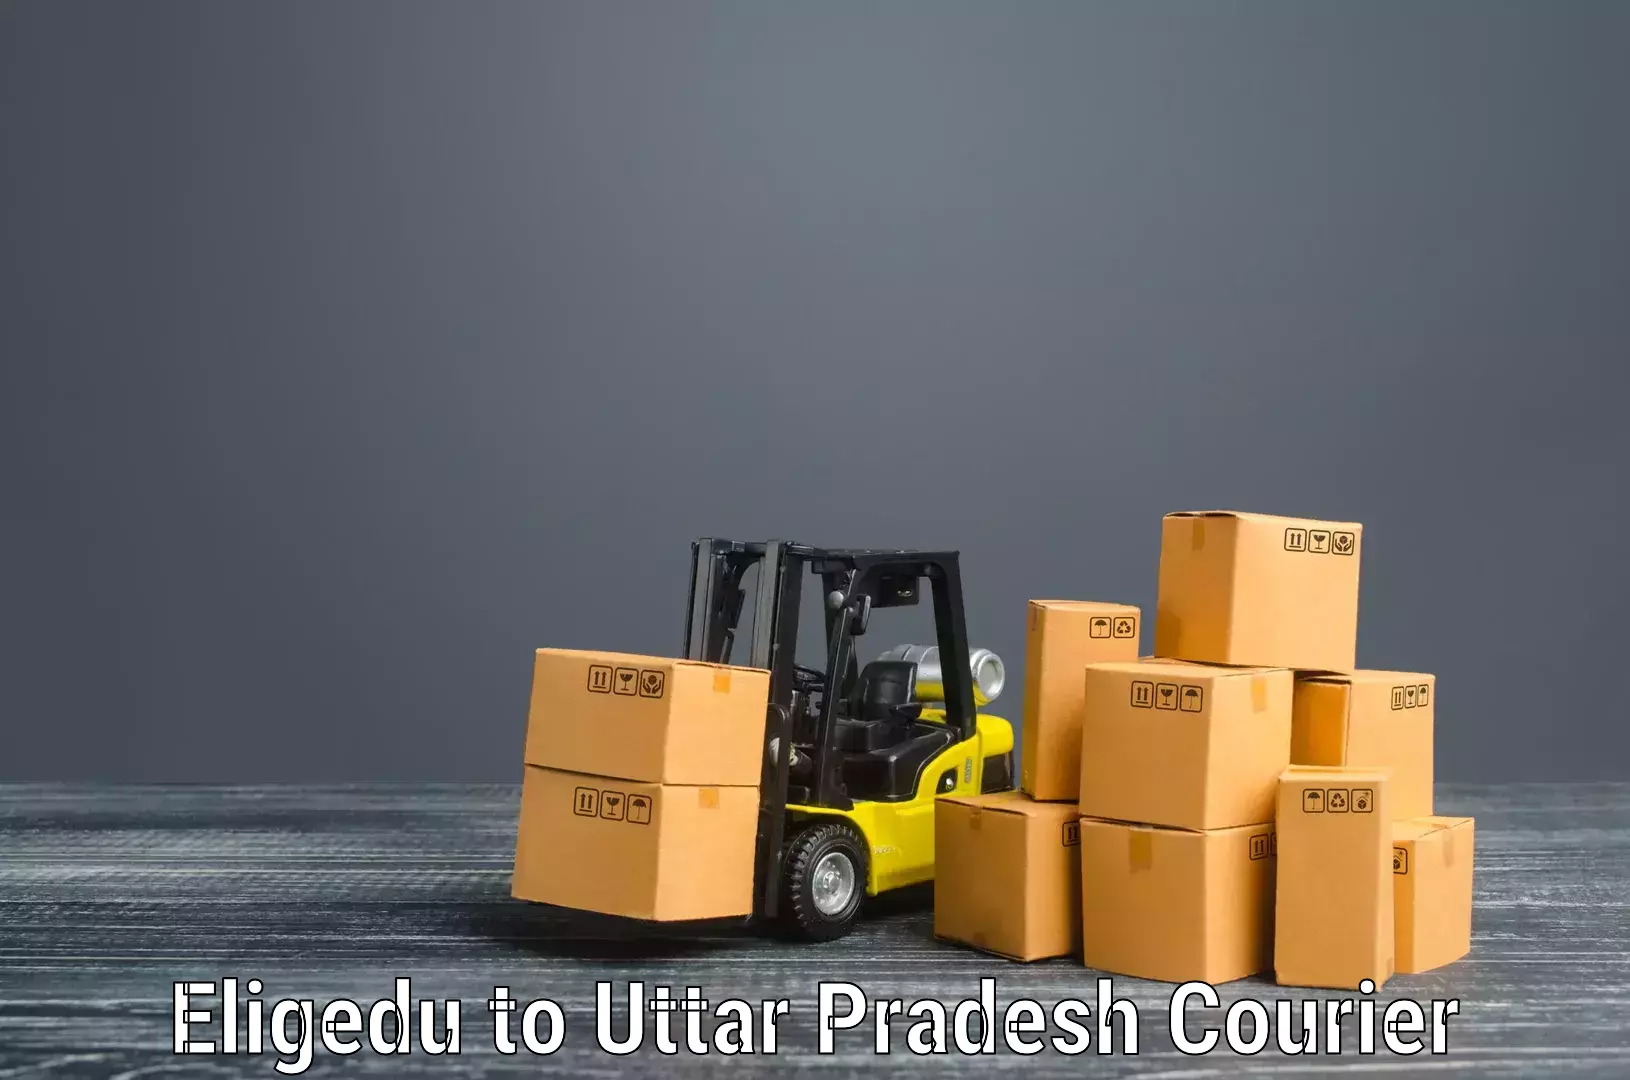 Efficient moving company Eligedu to Orai